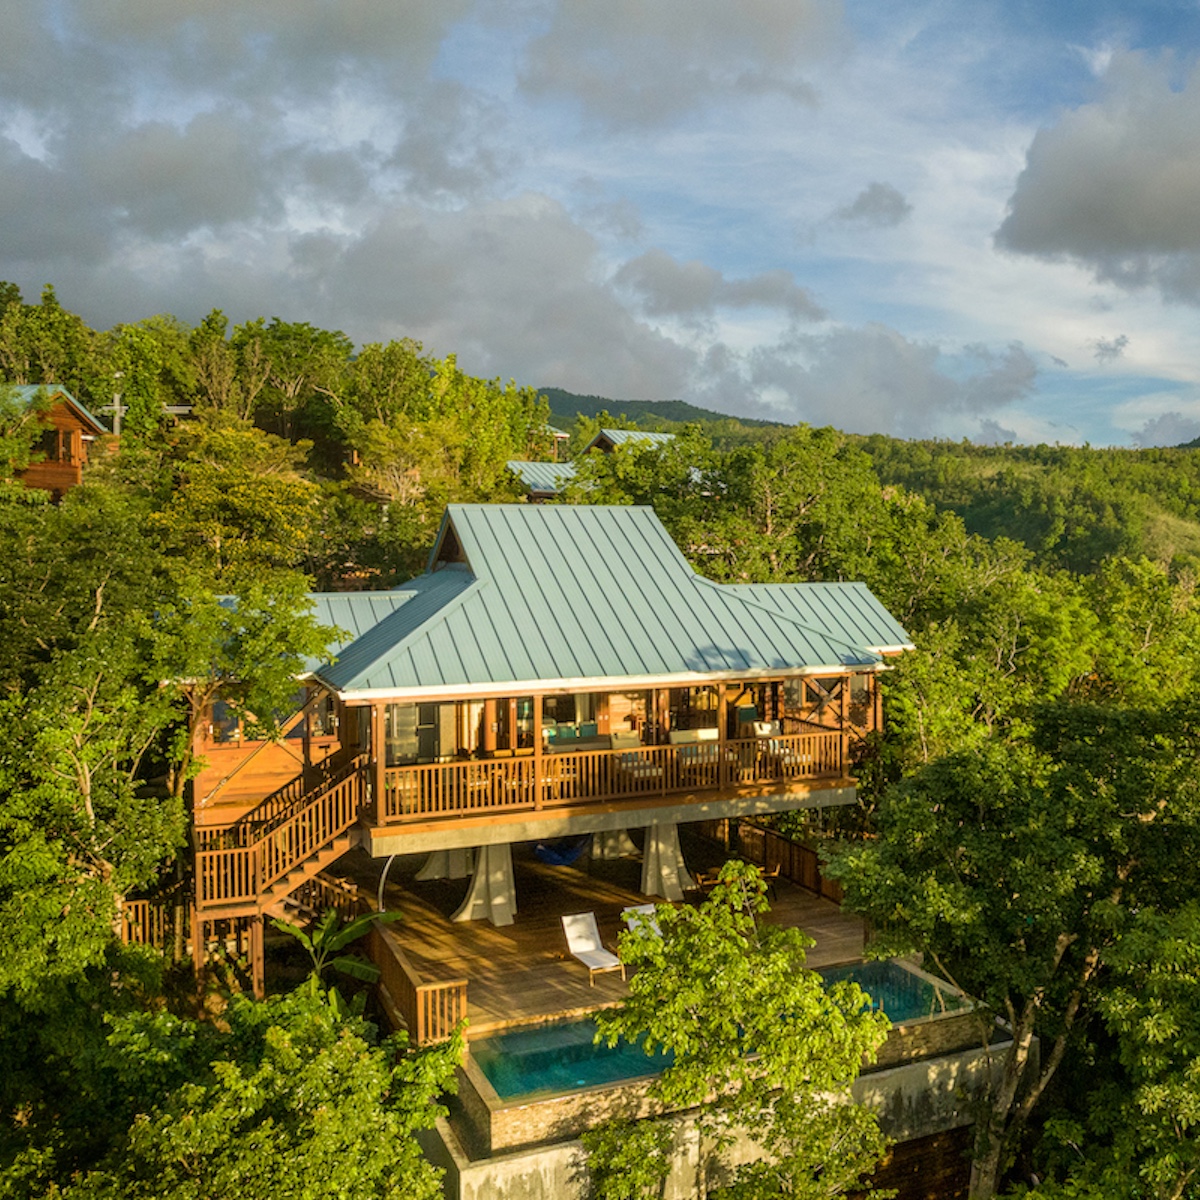 Hotel Deals Offers And Packages Secret Bay Dominica Caribbean